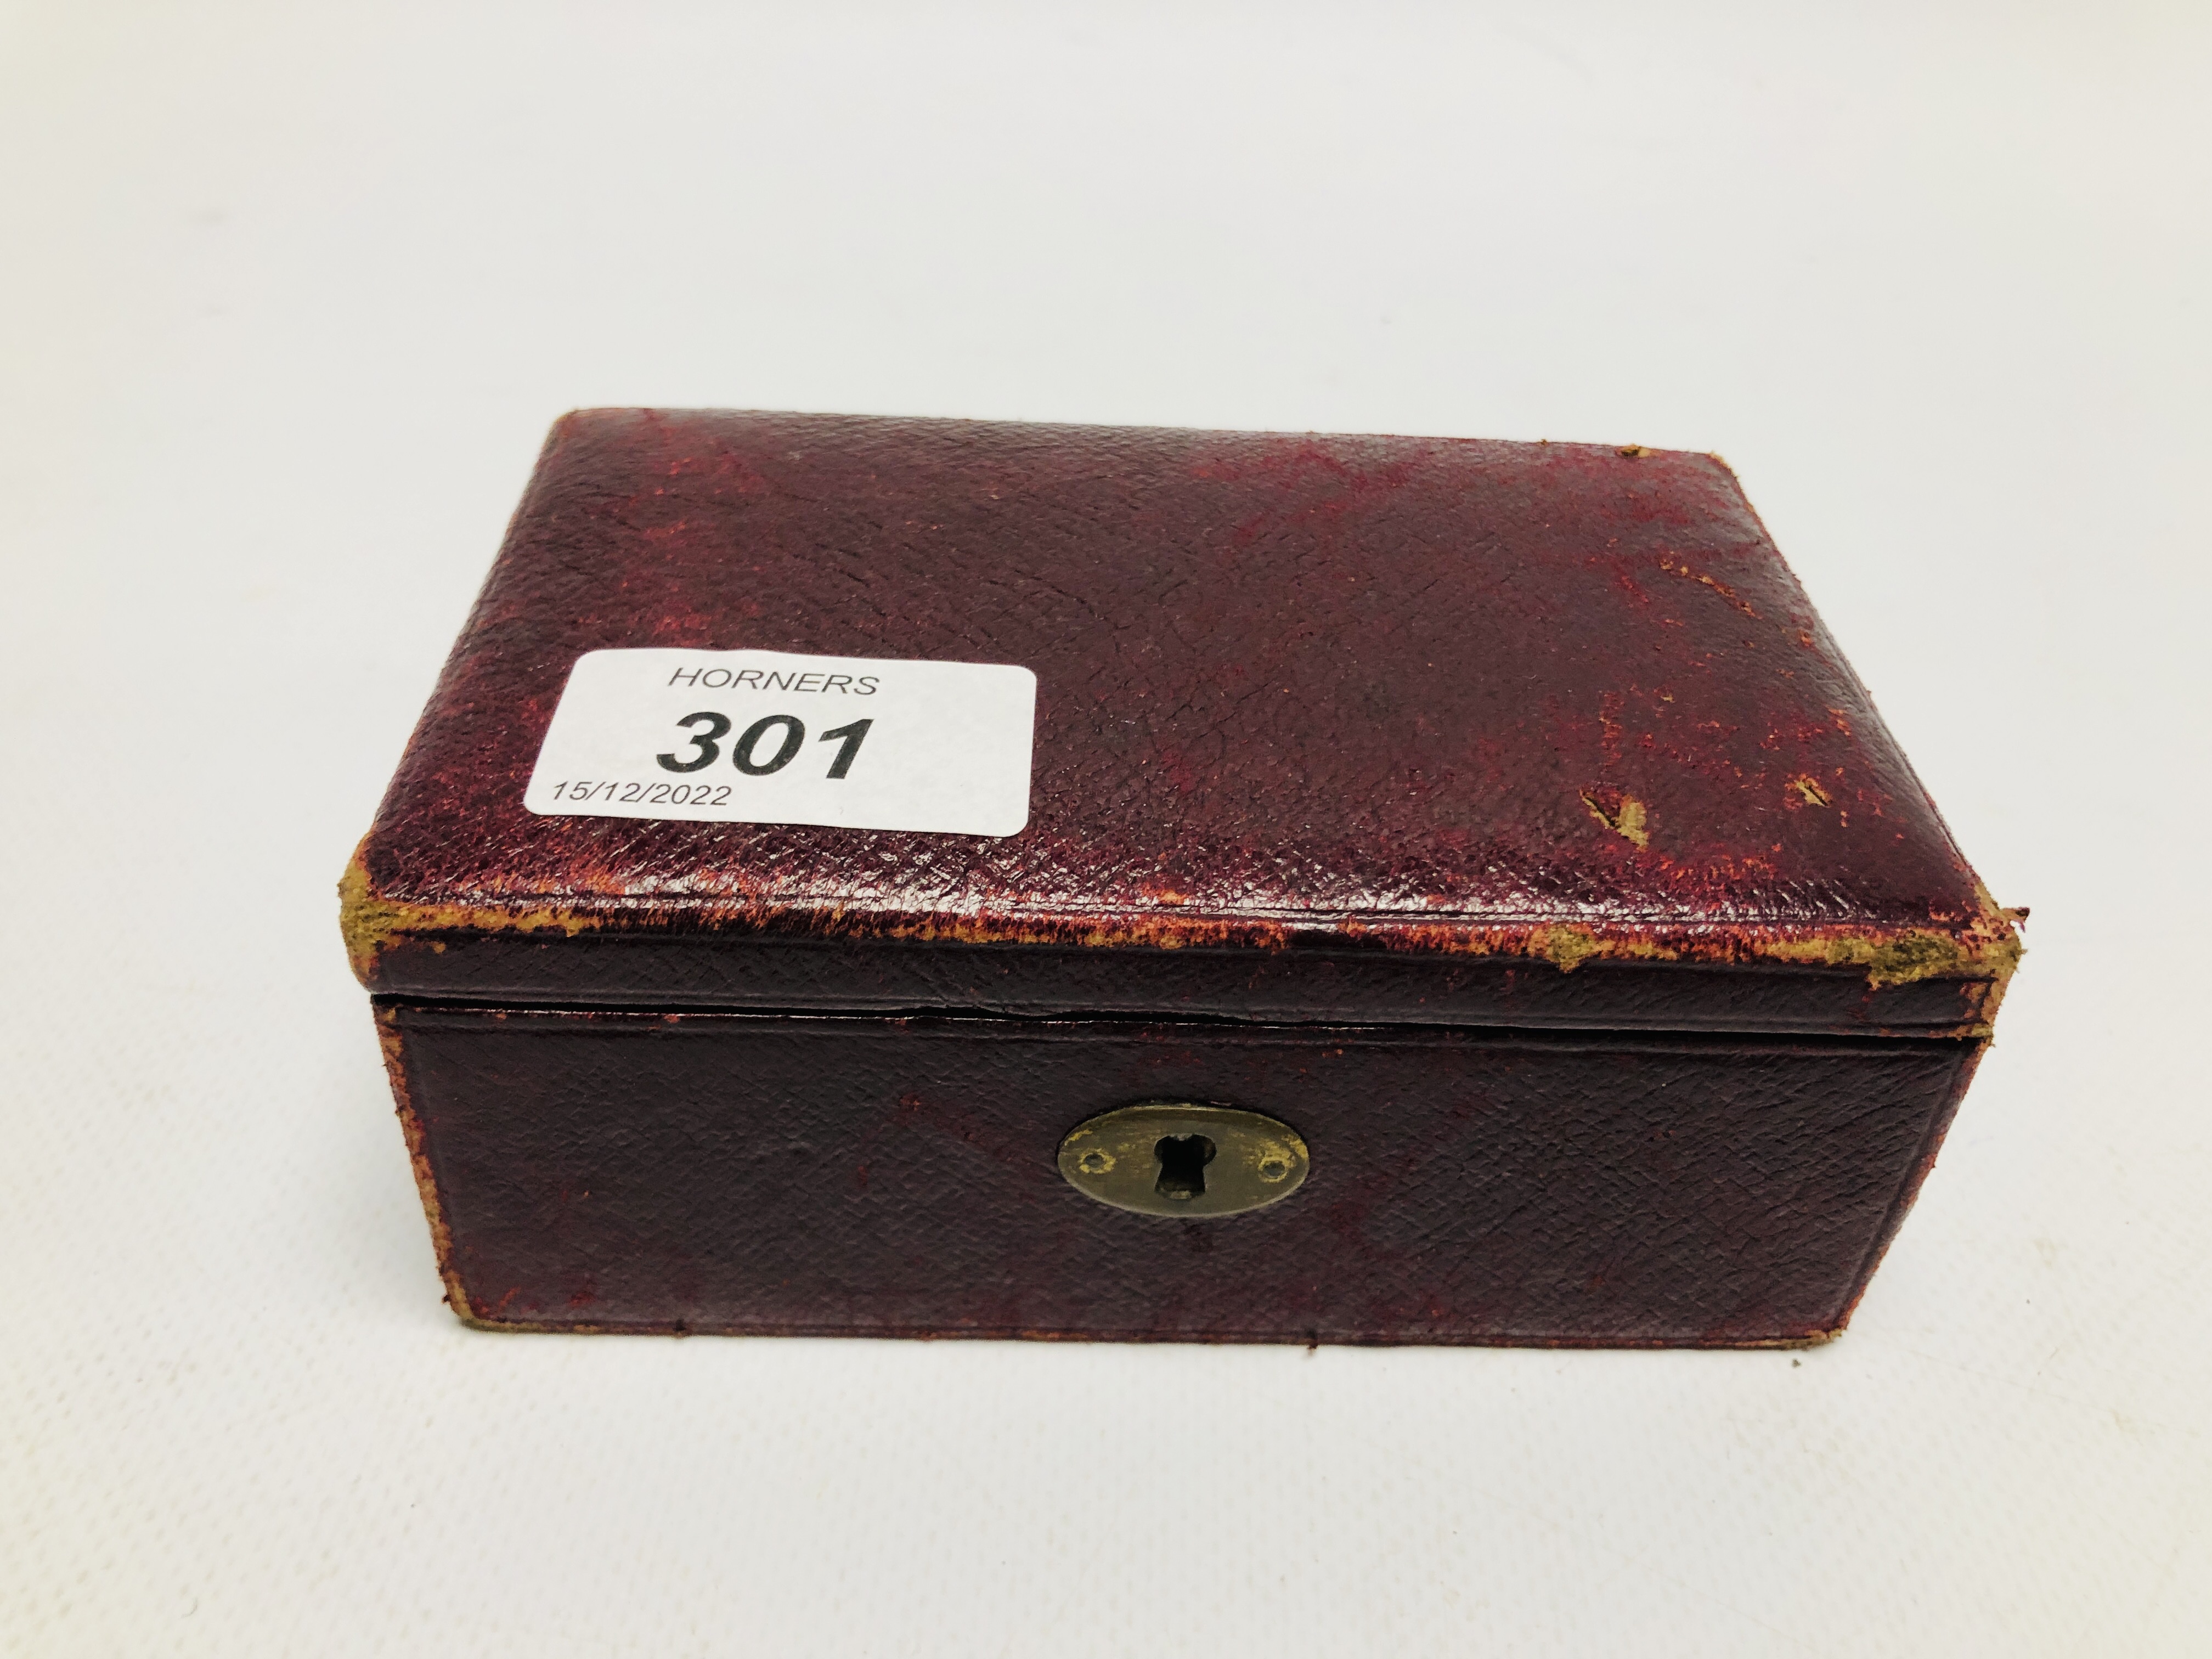 VINTAGE LEATHER BOUND JEWELLERY BOX AND CONTENTS TO INCLUDE MINIATURE ANIMALS, EBONY AND GILT RING, - Image 10 of 10